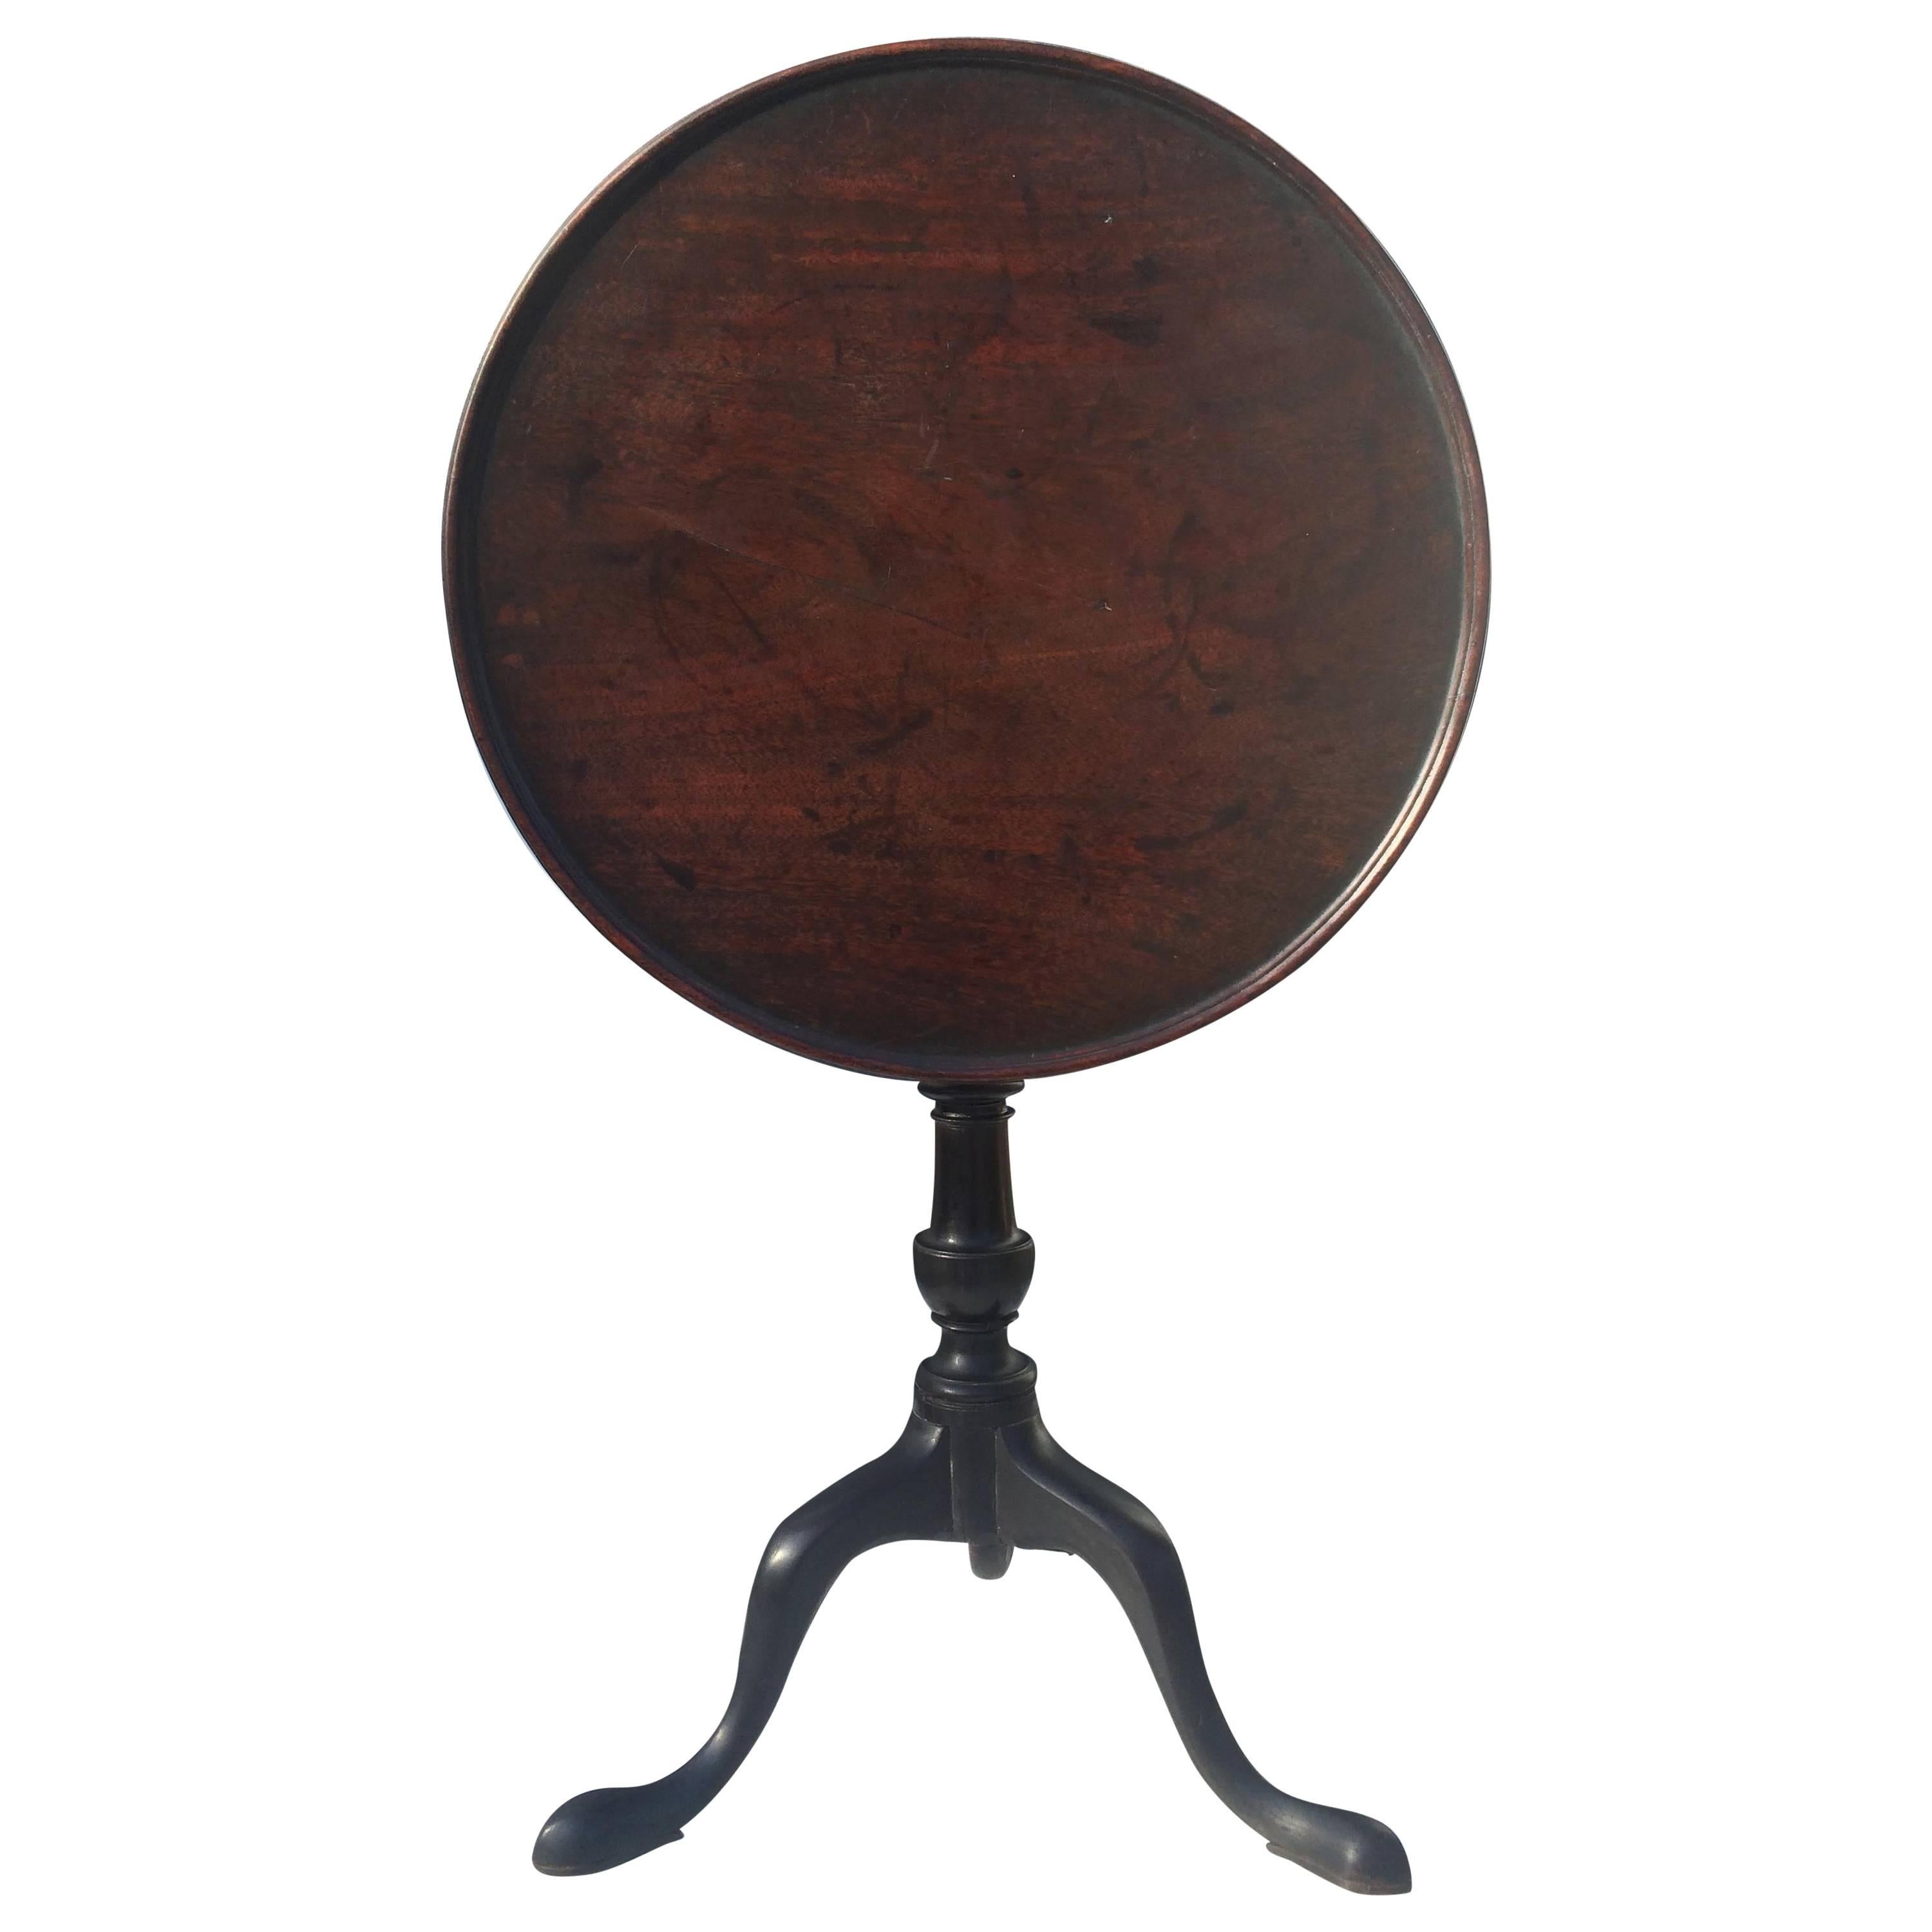 George III mahogany tilt-top table, England, 18th century. Circular rimmed tilting top above turned column and tripod base with pad feet.
 
        